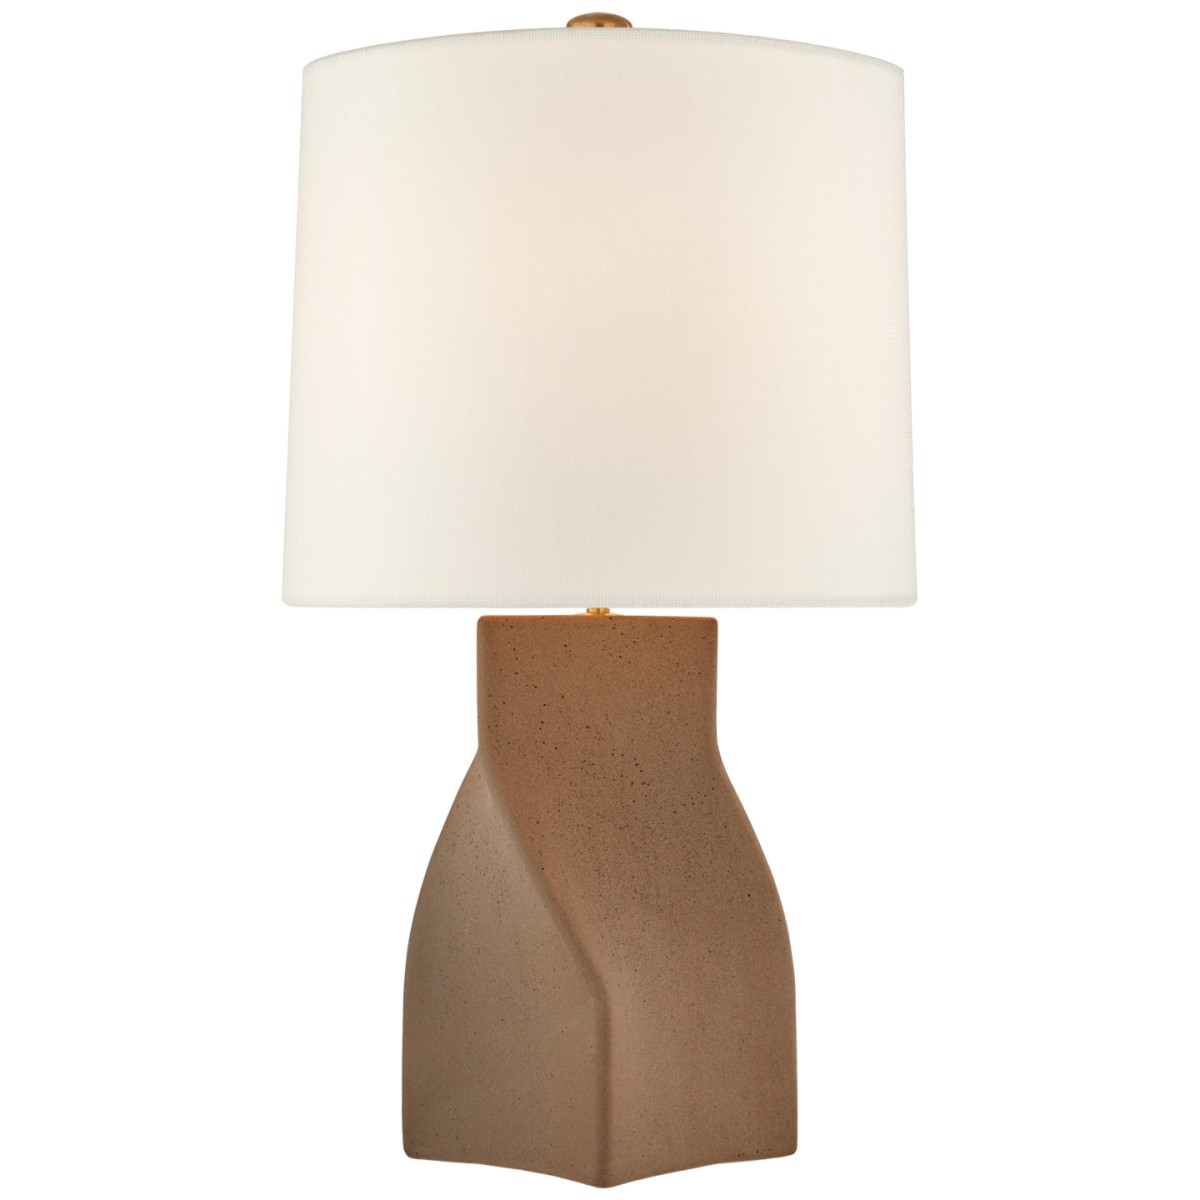 Claribel Large Table Lamp with Linen Shade